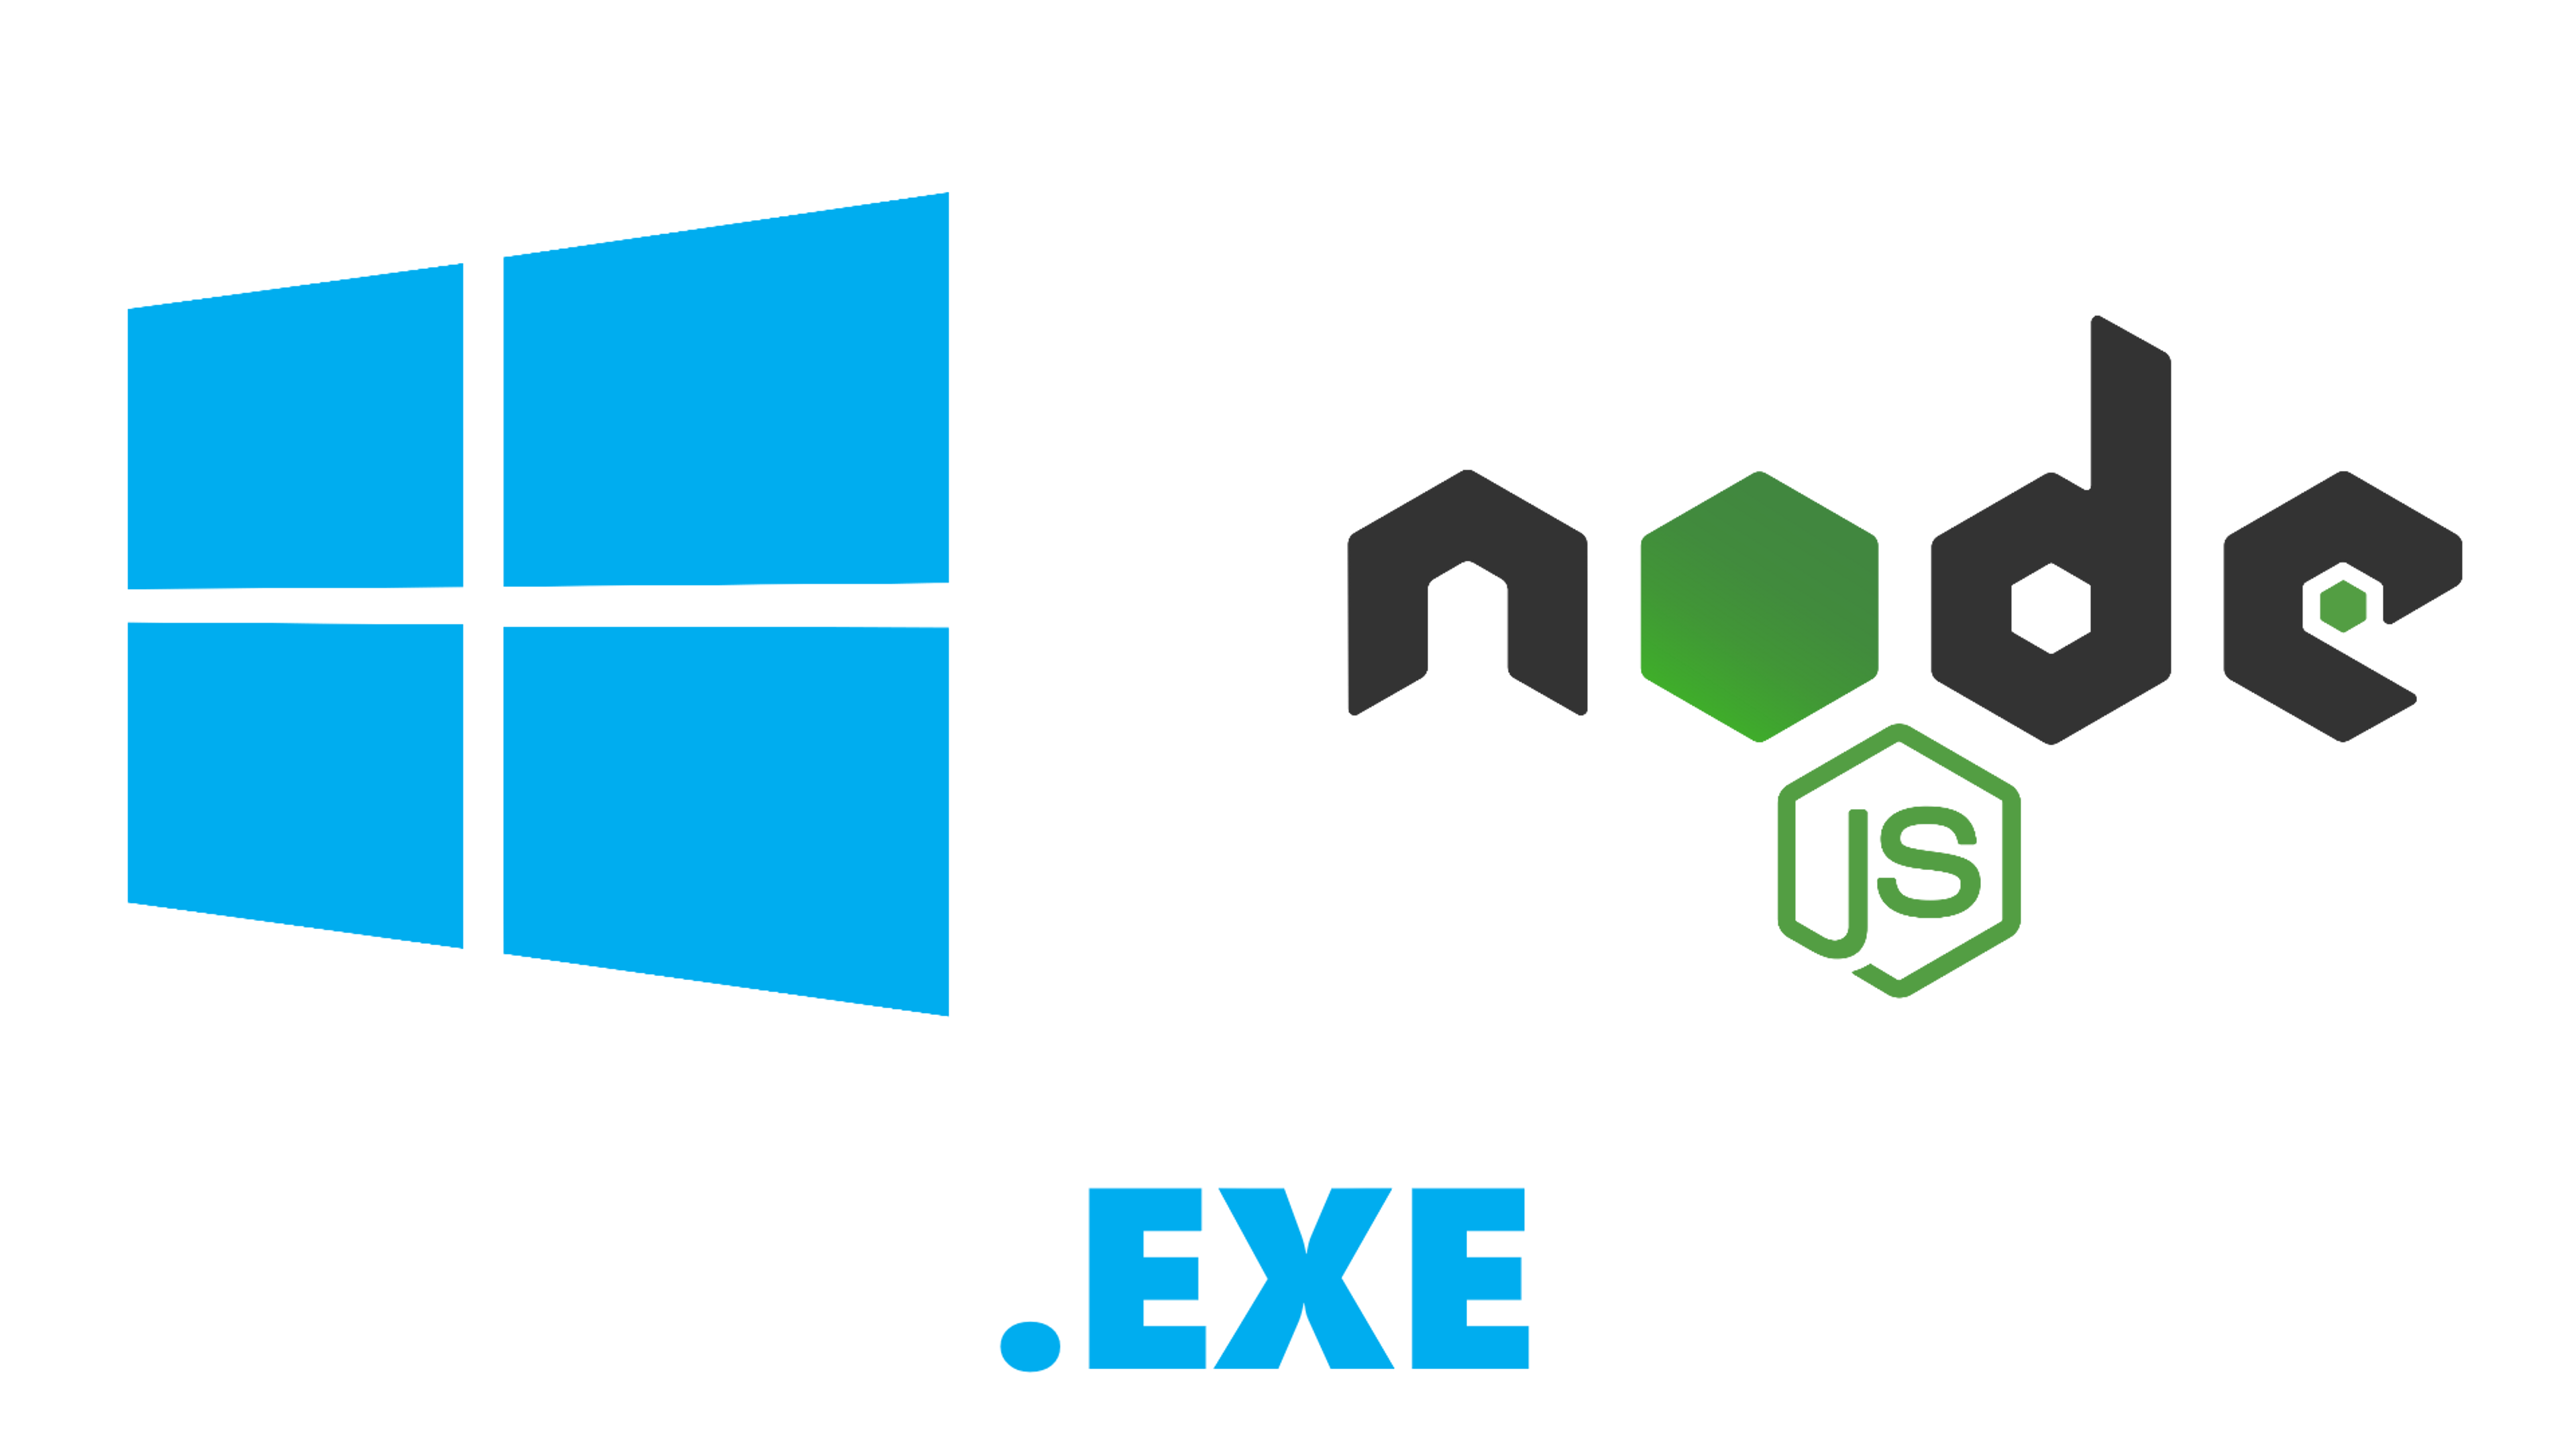 Creating a Windows Executable File (.exe) from a Node.js app